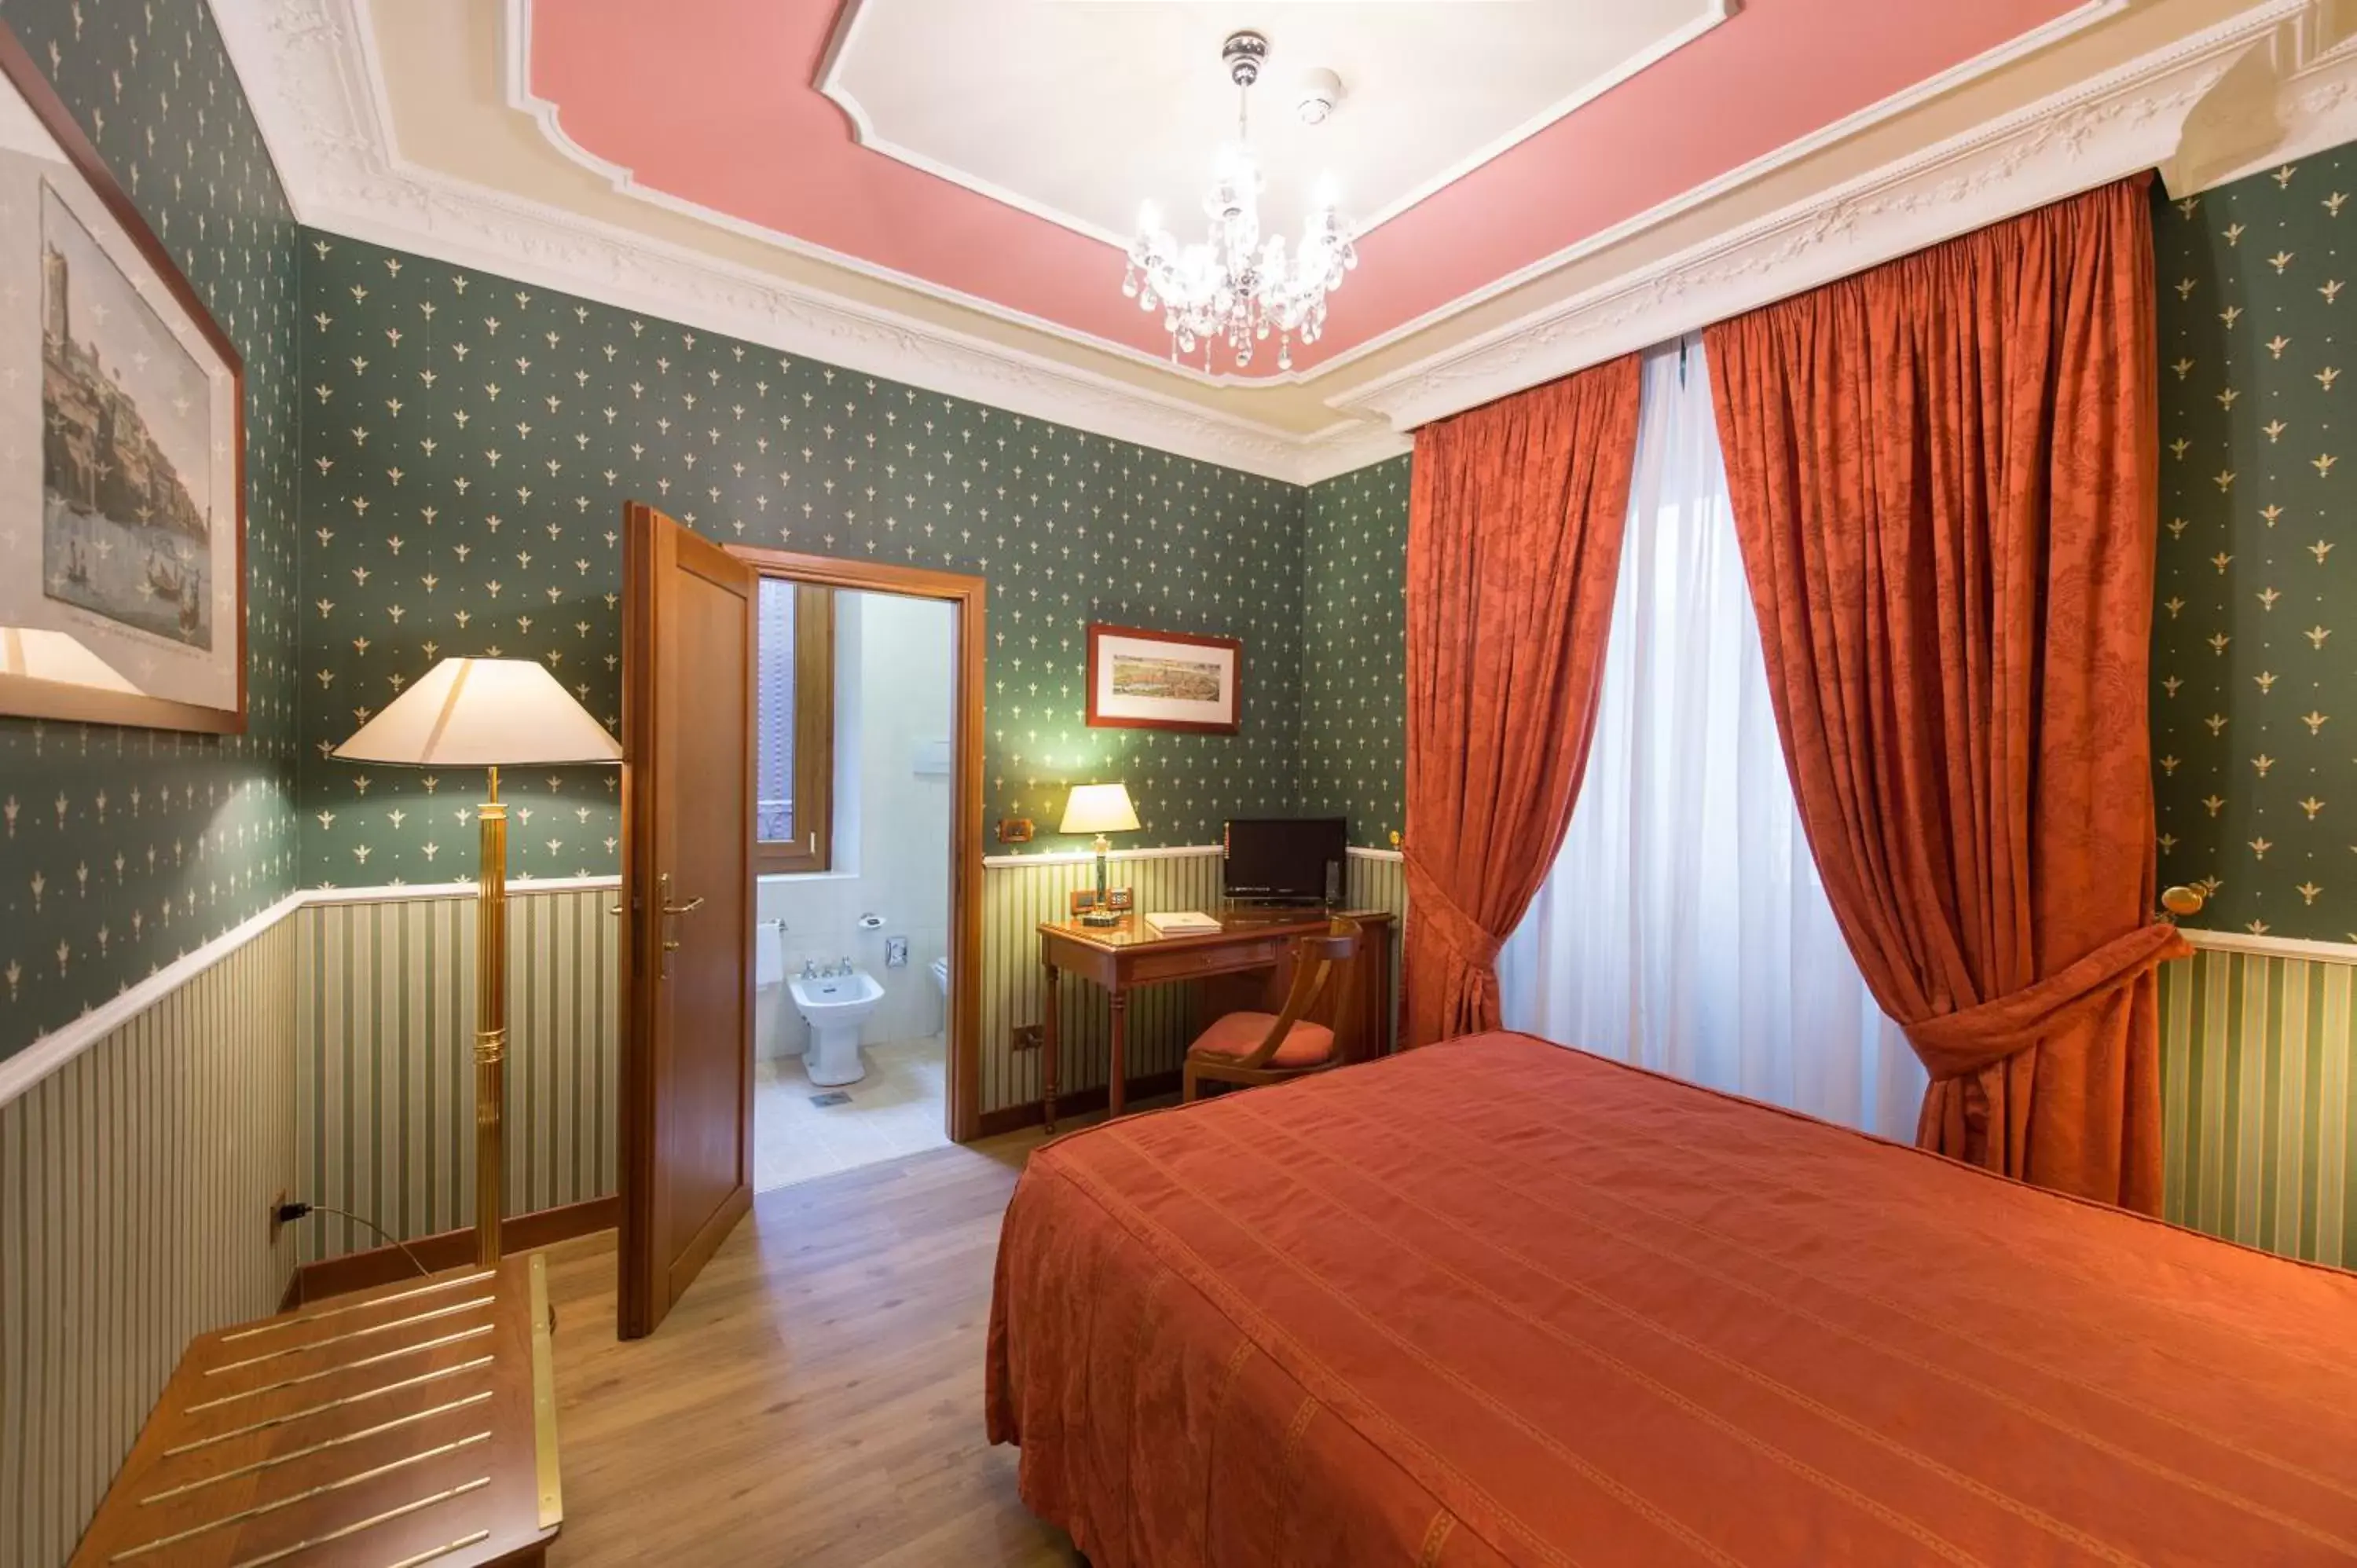 Bedroom in Strozzi Palace Hotel